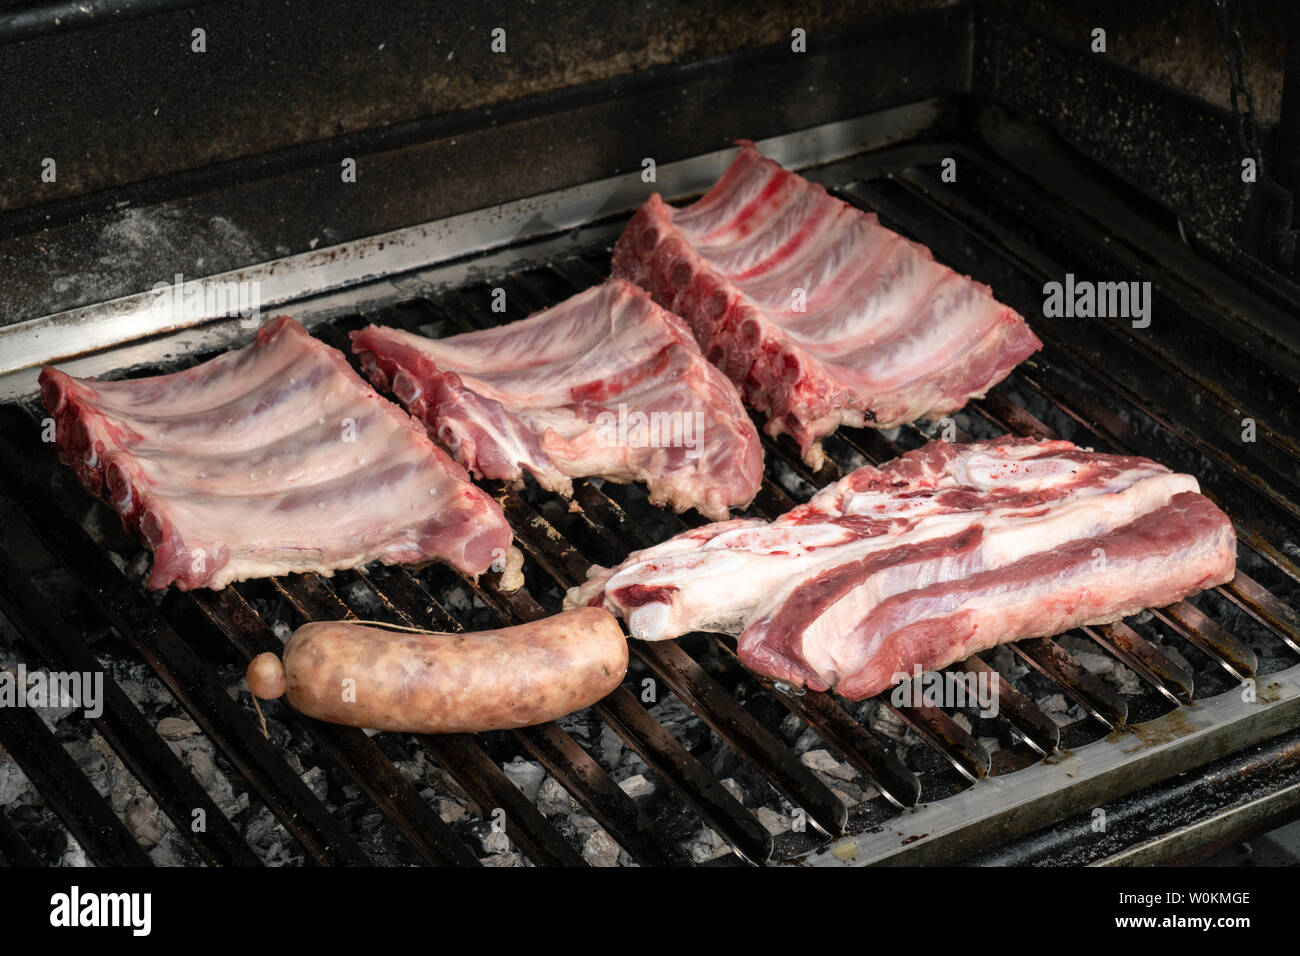 Barbecue with fresh pork ribs, beef and criollo sausage. Spanish churrasco Stock Photo